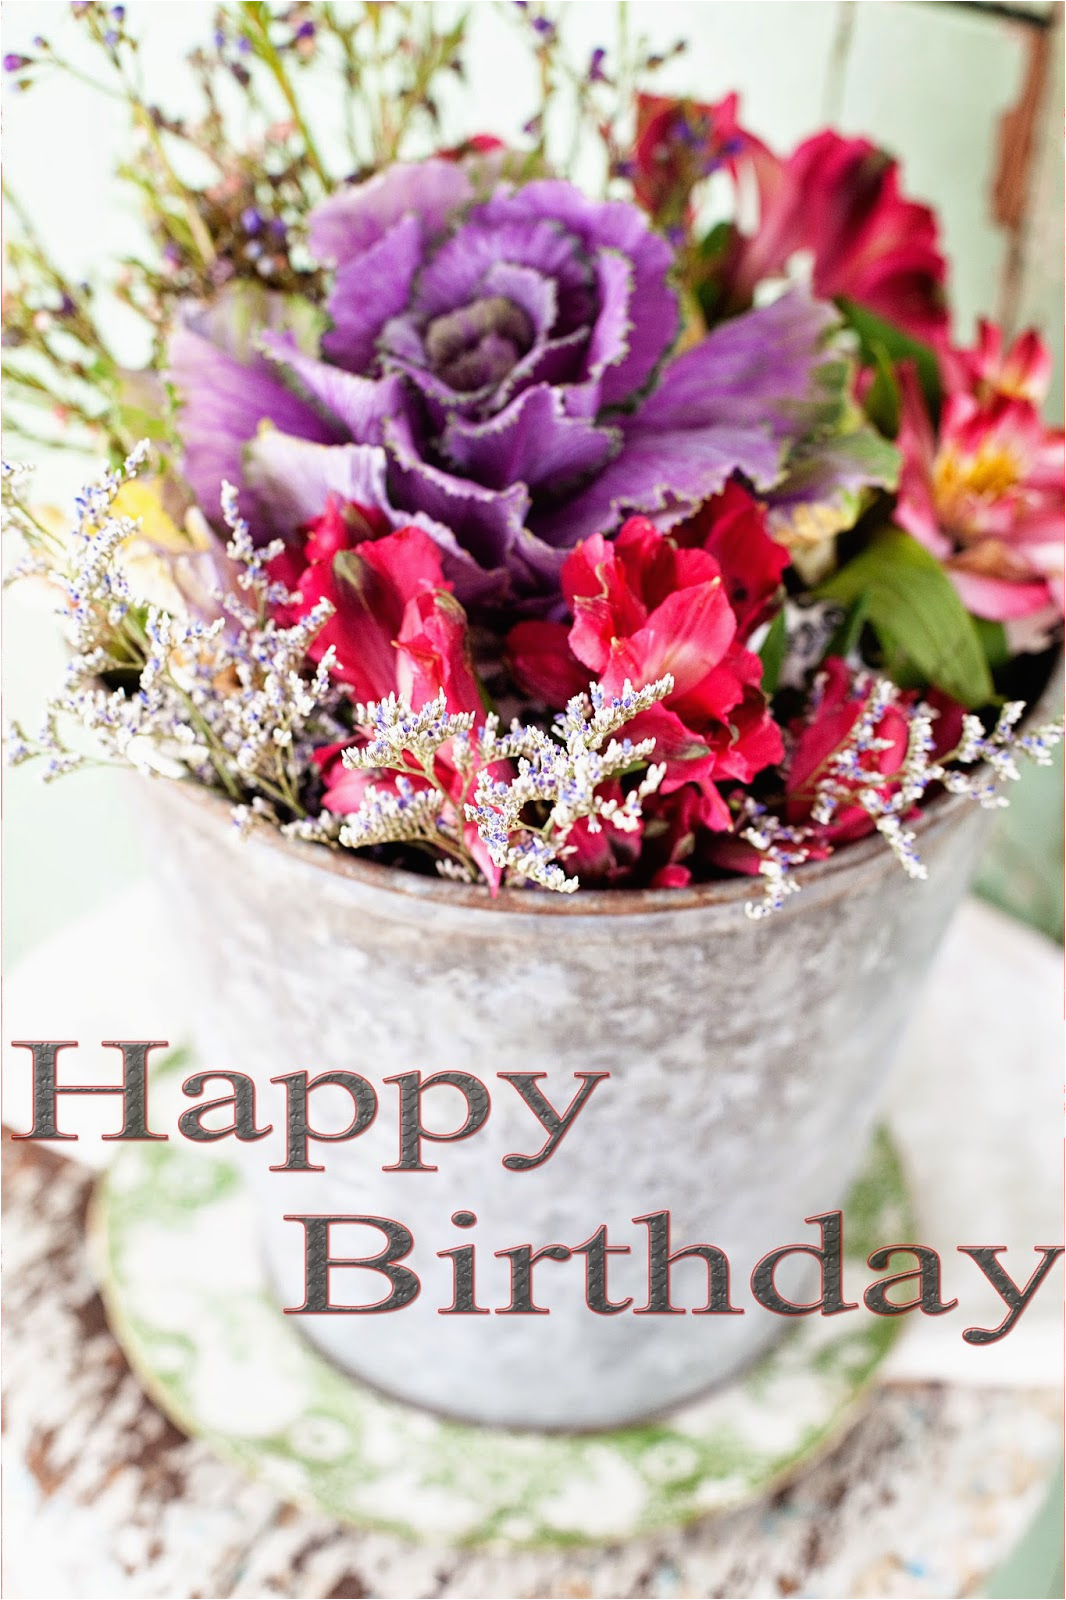 happy birthday cake and flowers images greetings wishes